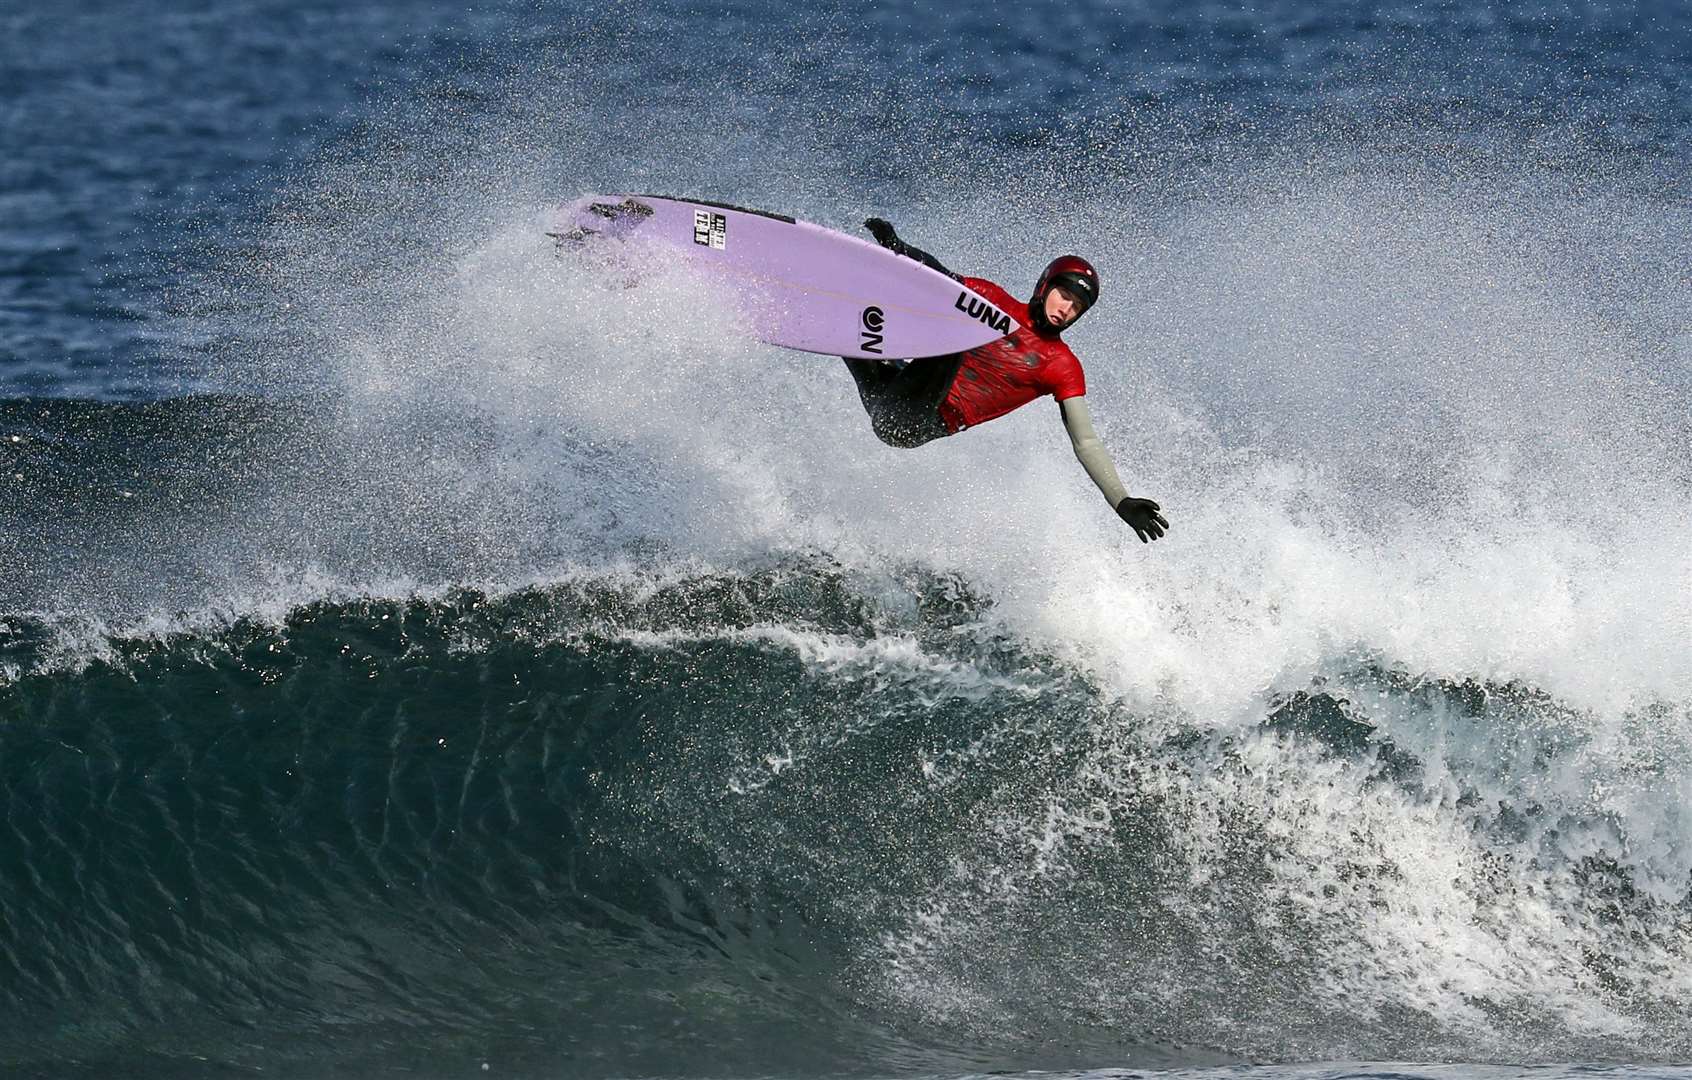 North Shore Surf Club's Craig McLachlan competing at Thurso East. The awards will be presented at the club's base on December 6. Picture: James Gunn